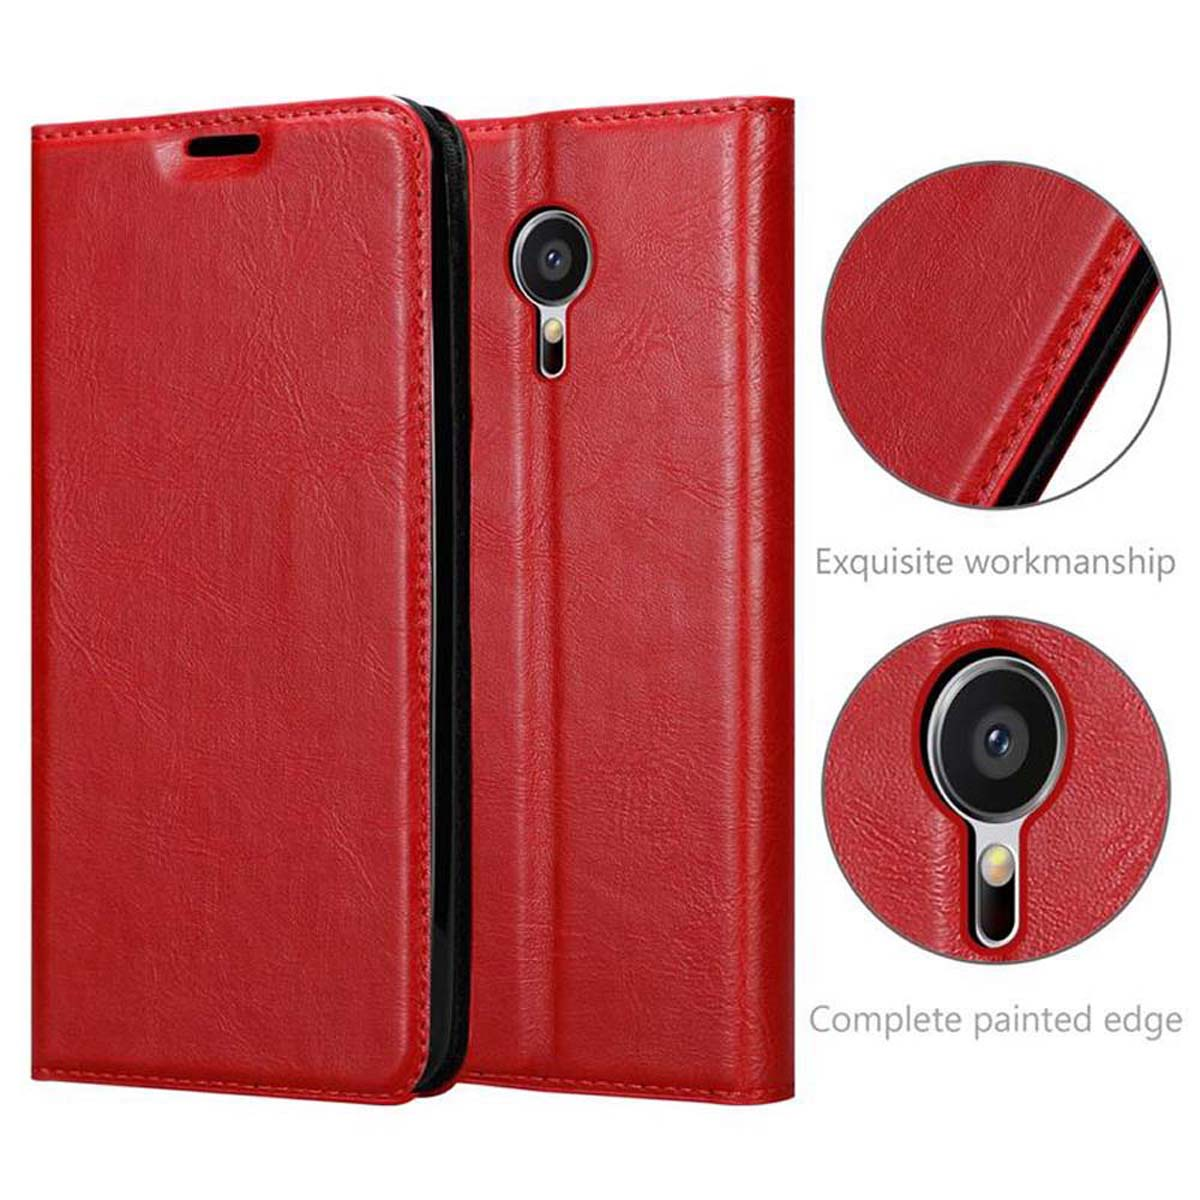 CADORABO Book Hülle Invisible Magnet, MEIZU, ROT Bookcover, APFEL MX5